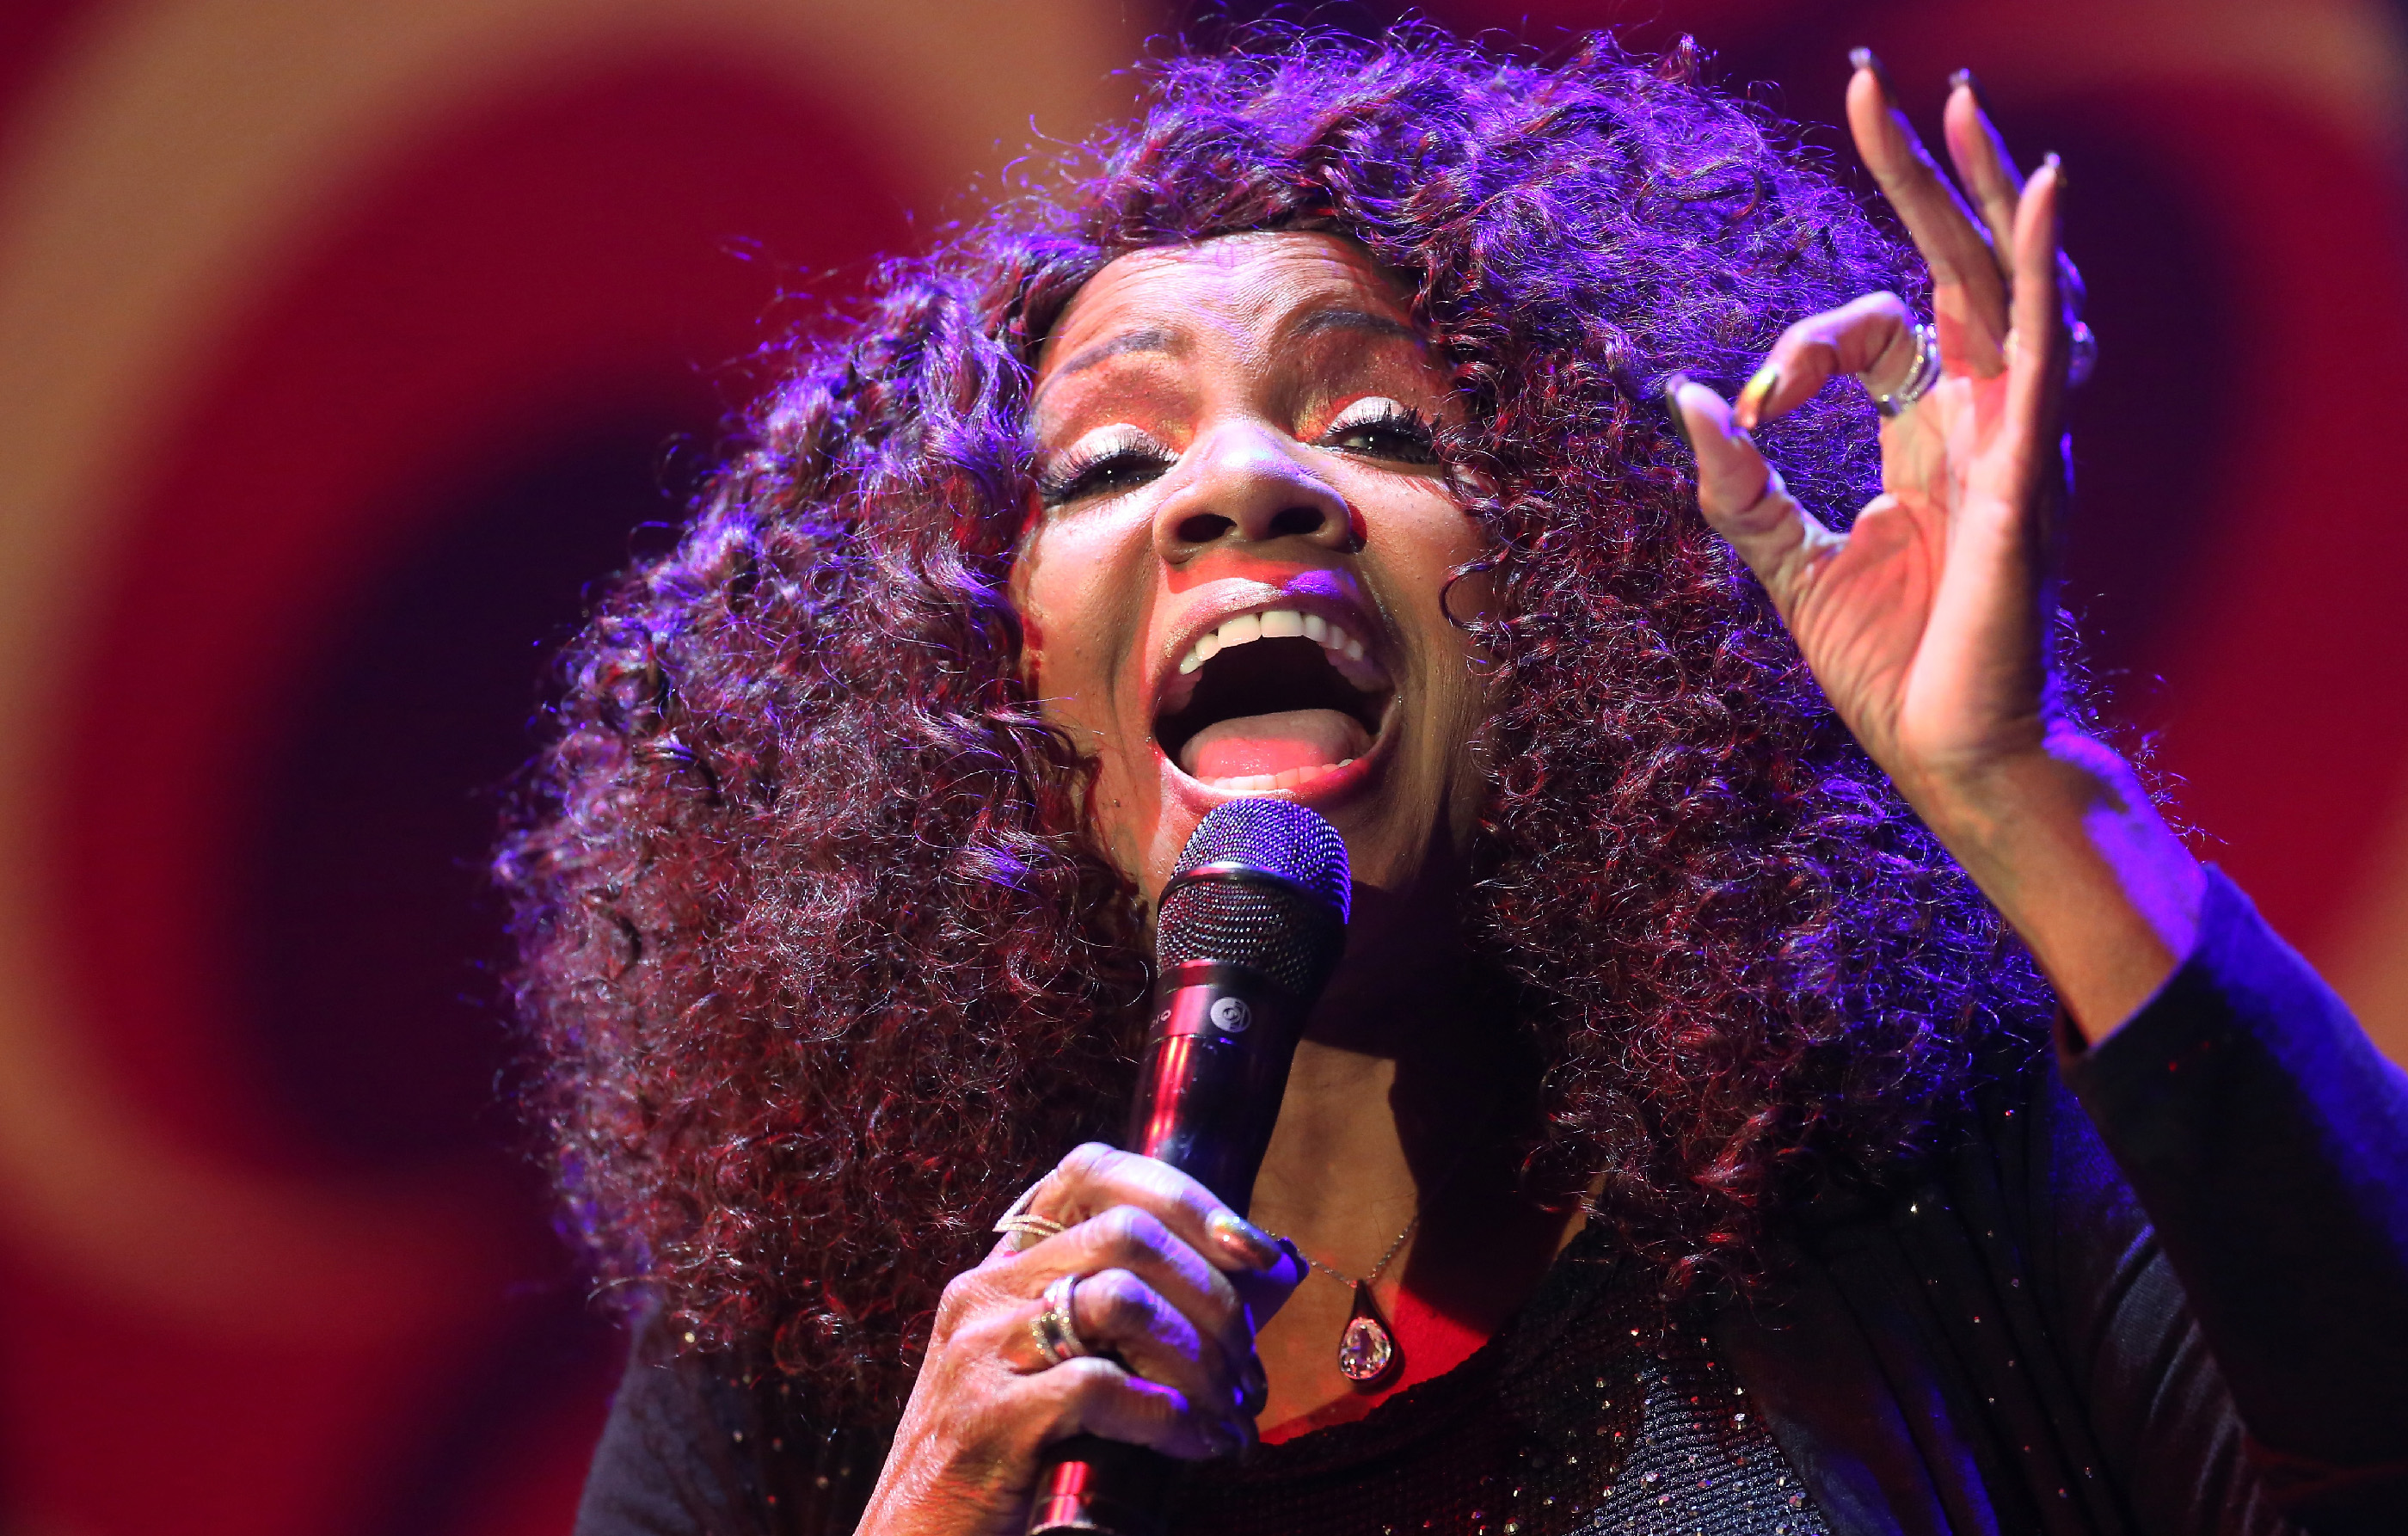 70-Year-Old Gloria Gaynor Has A Roommate, And She Says More Older Americans Should Do It Too